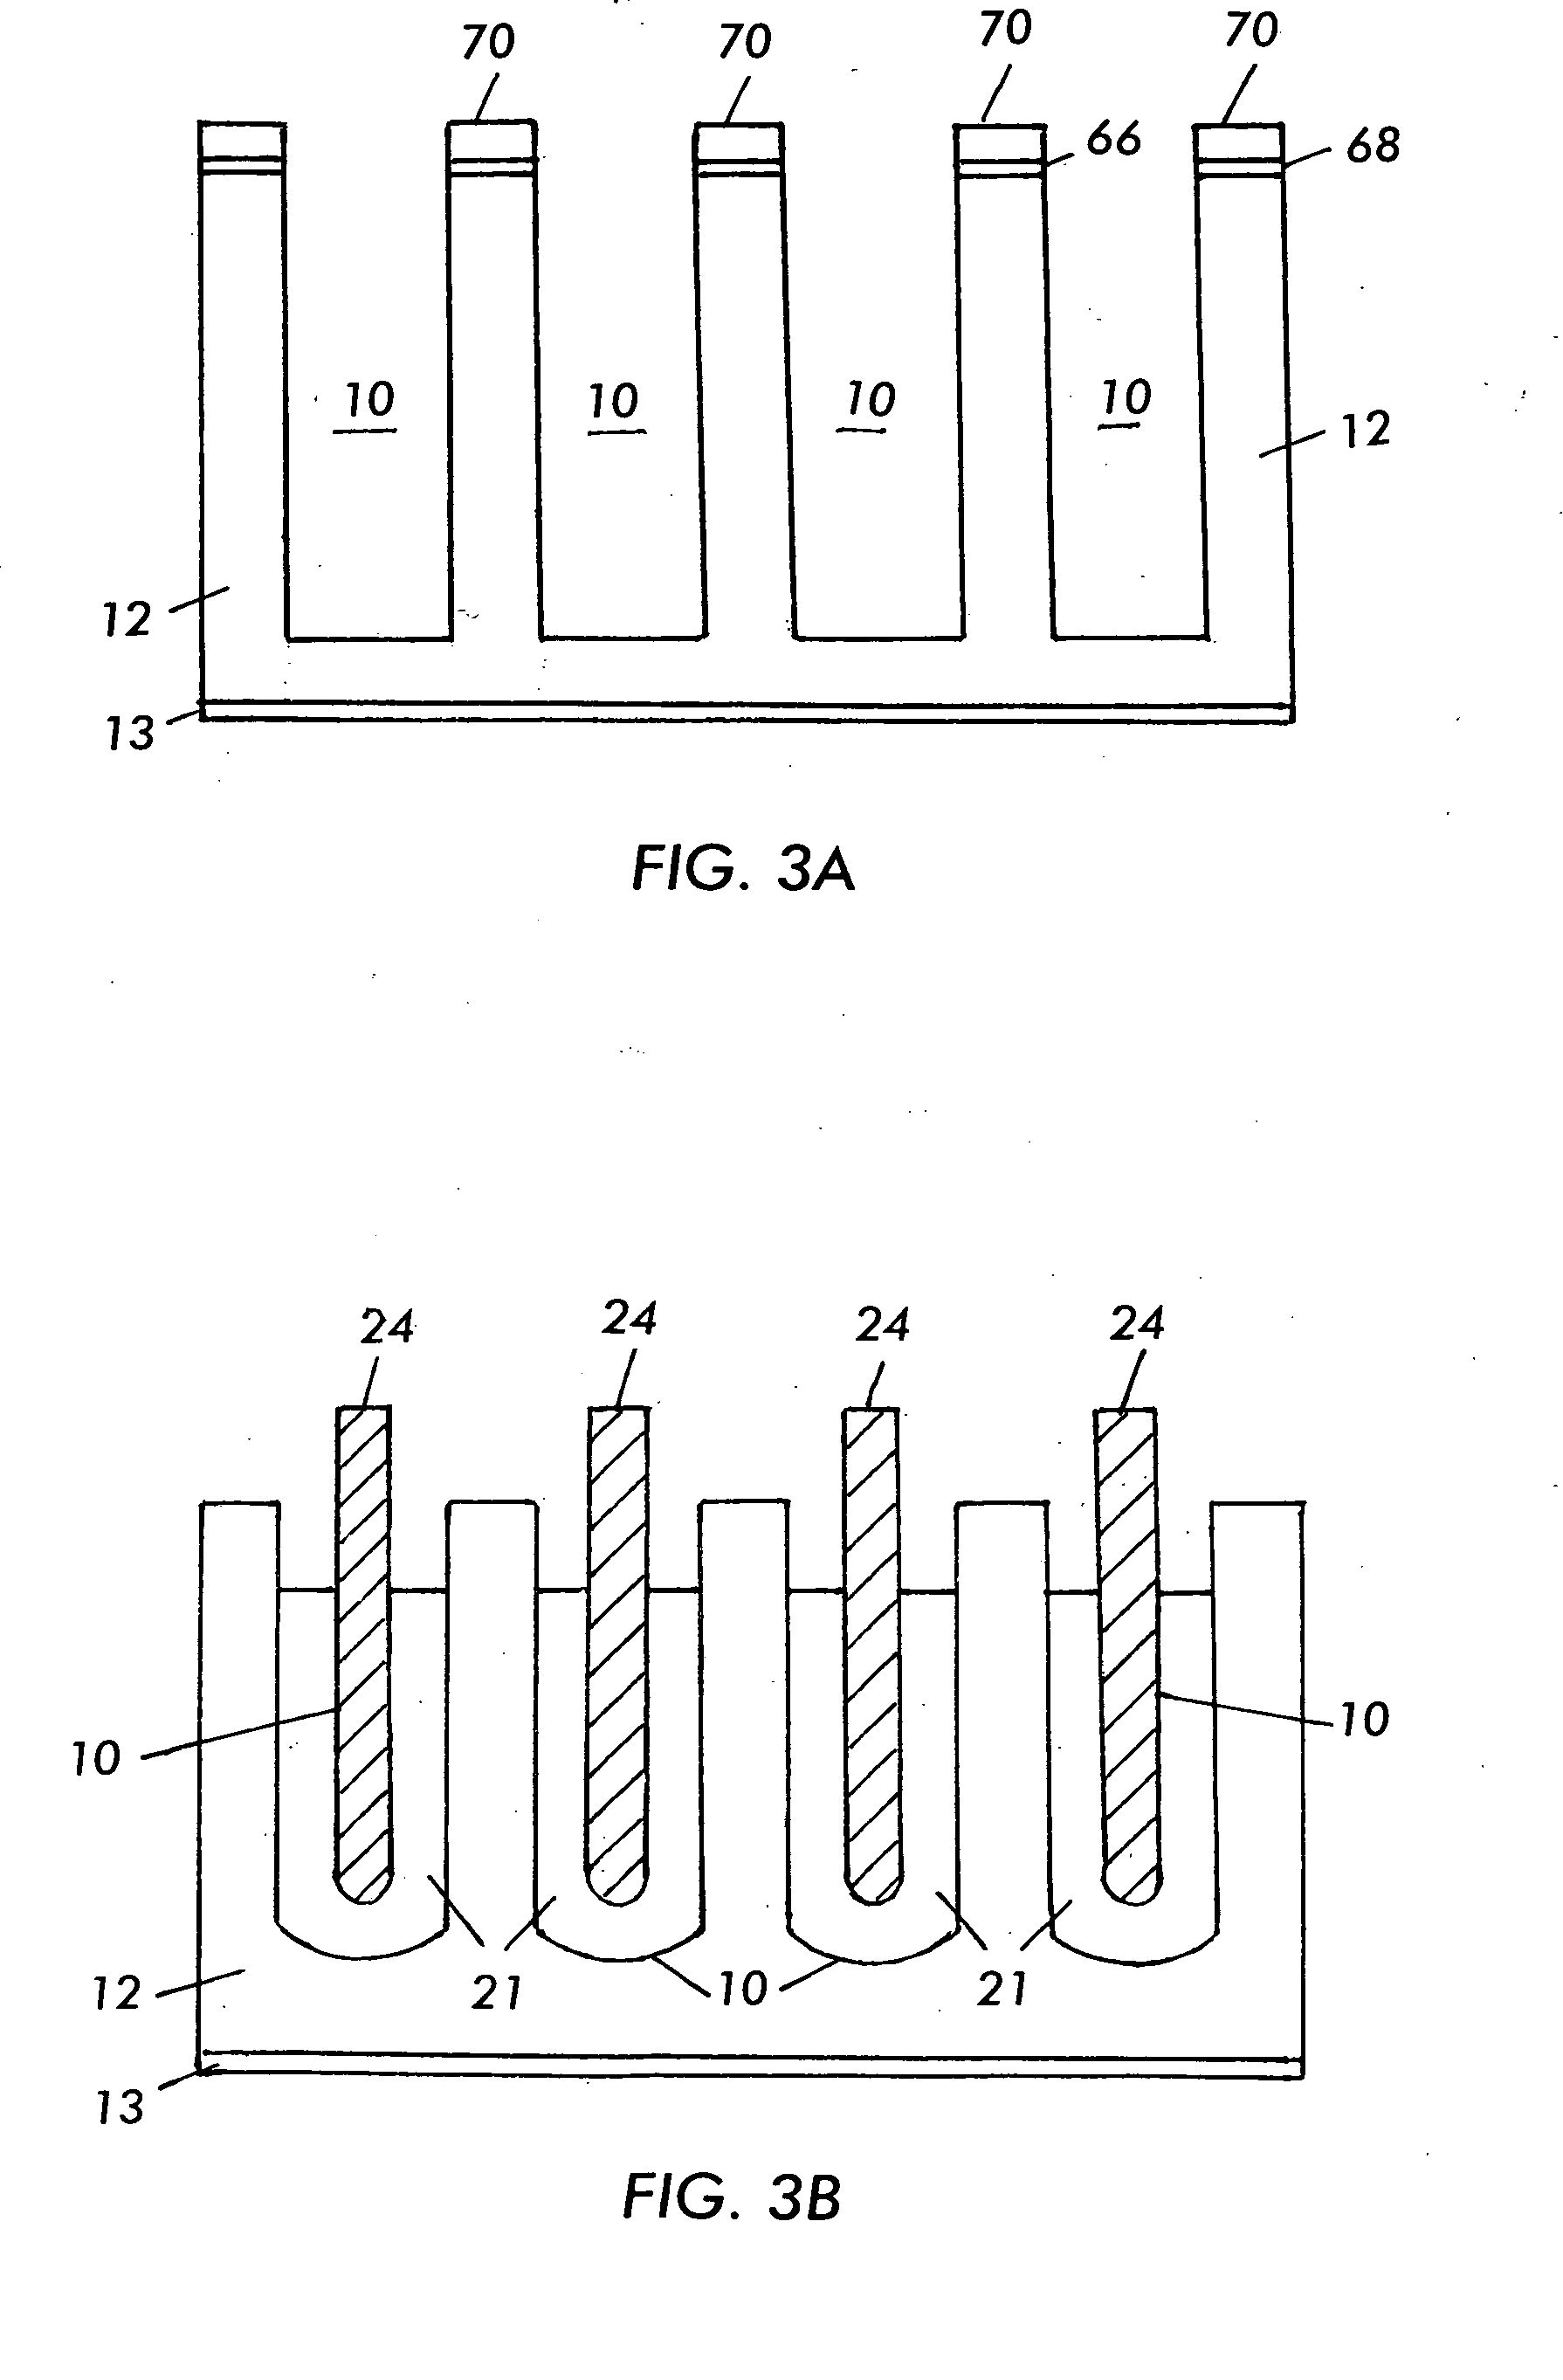 Integrated mosfet and schottky device